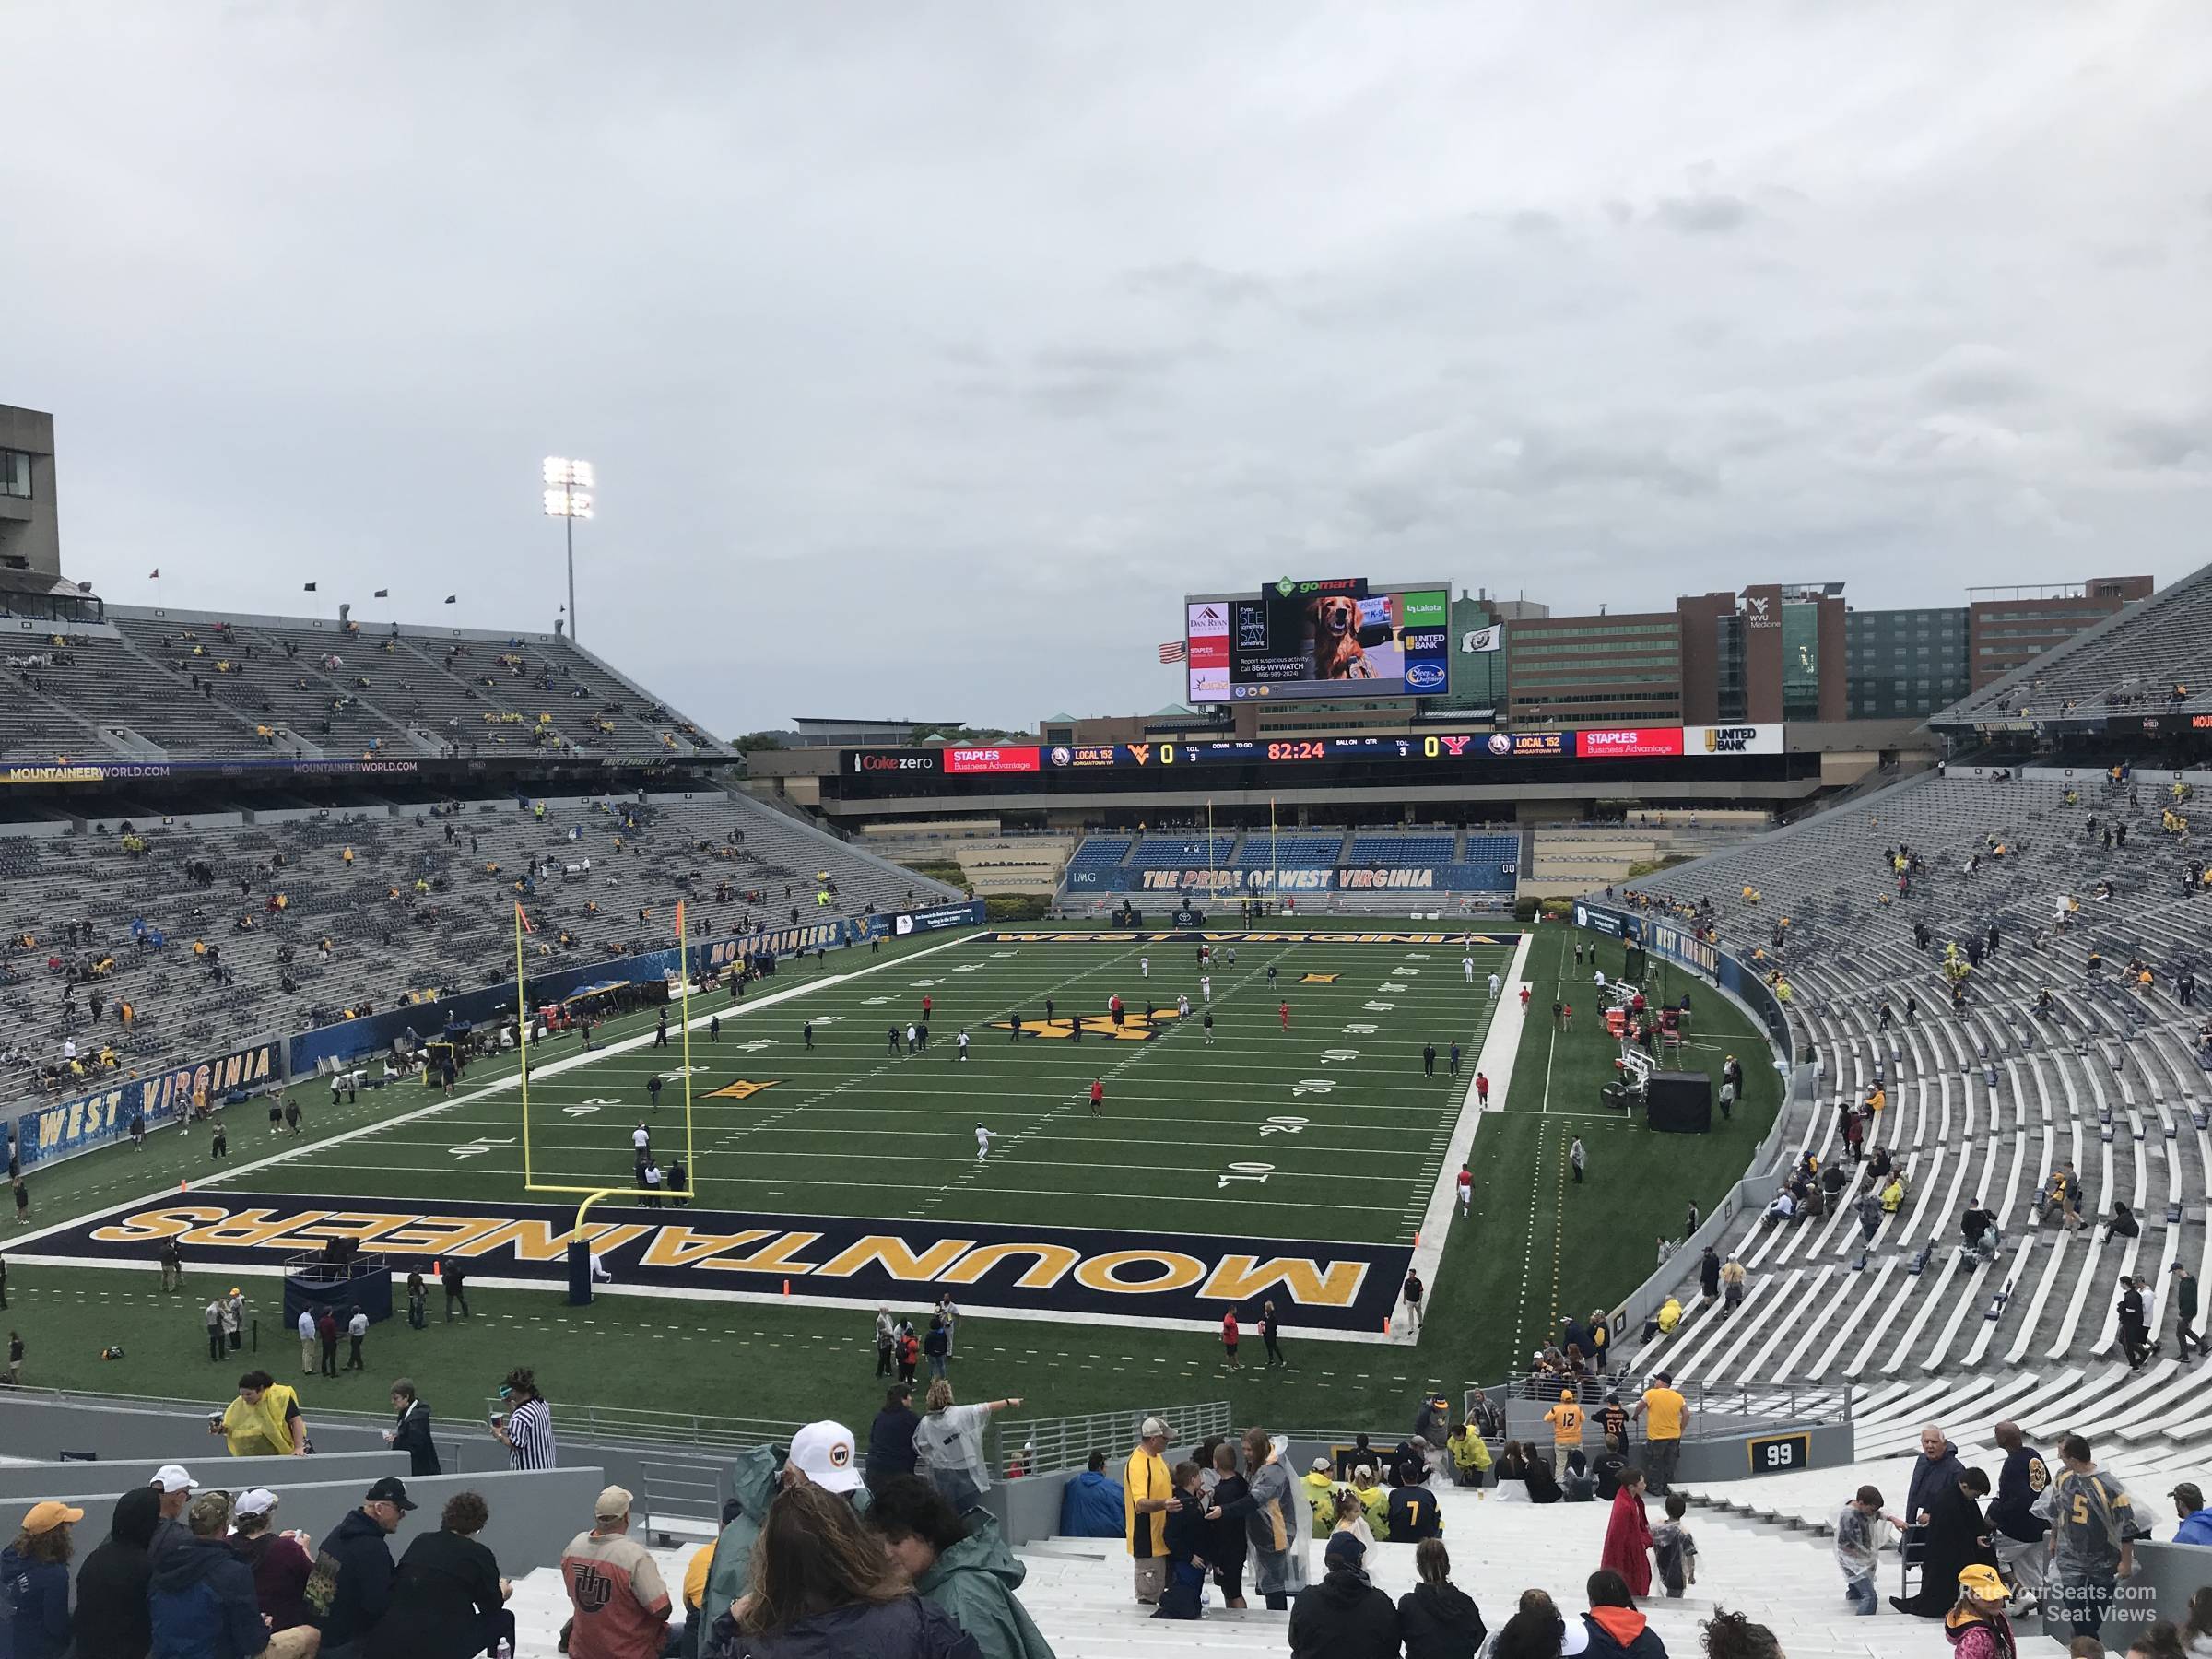 Section 98 at Mountaineer Field - RateYourSeats.com